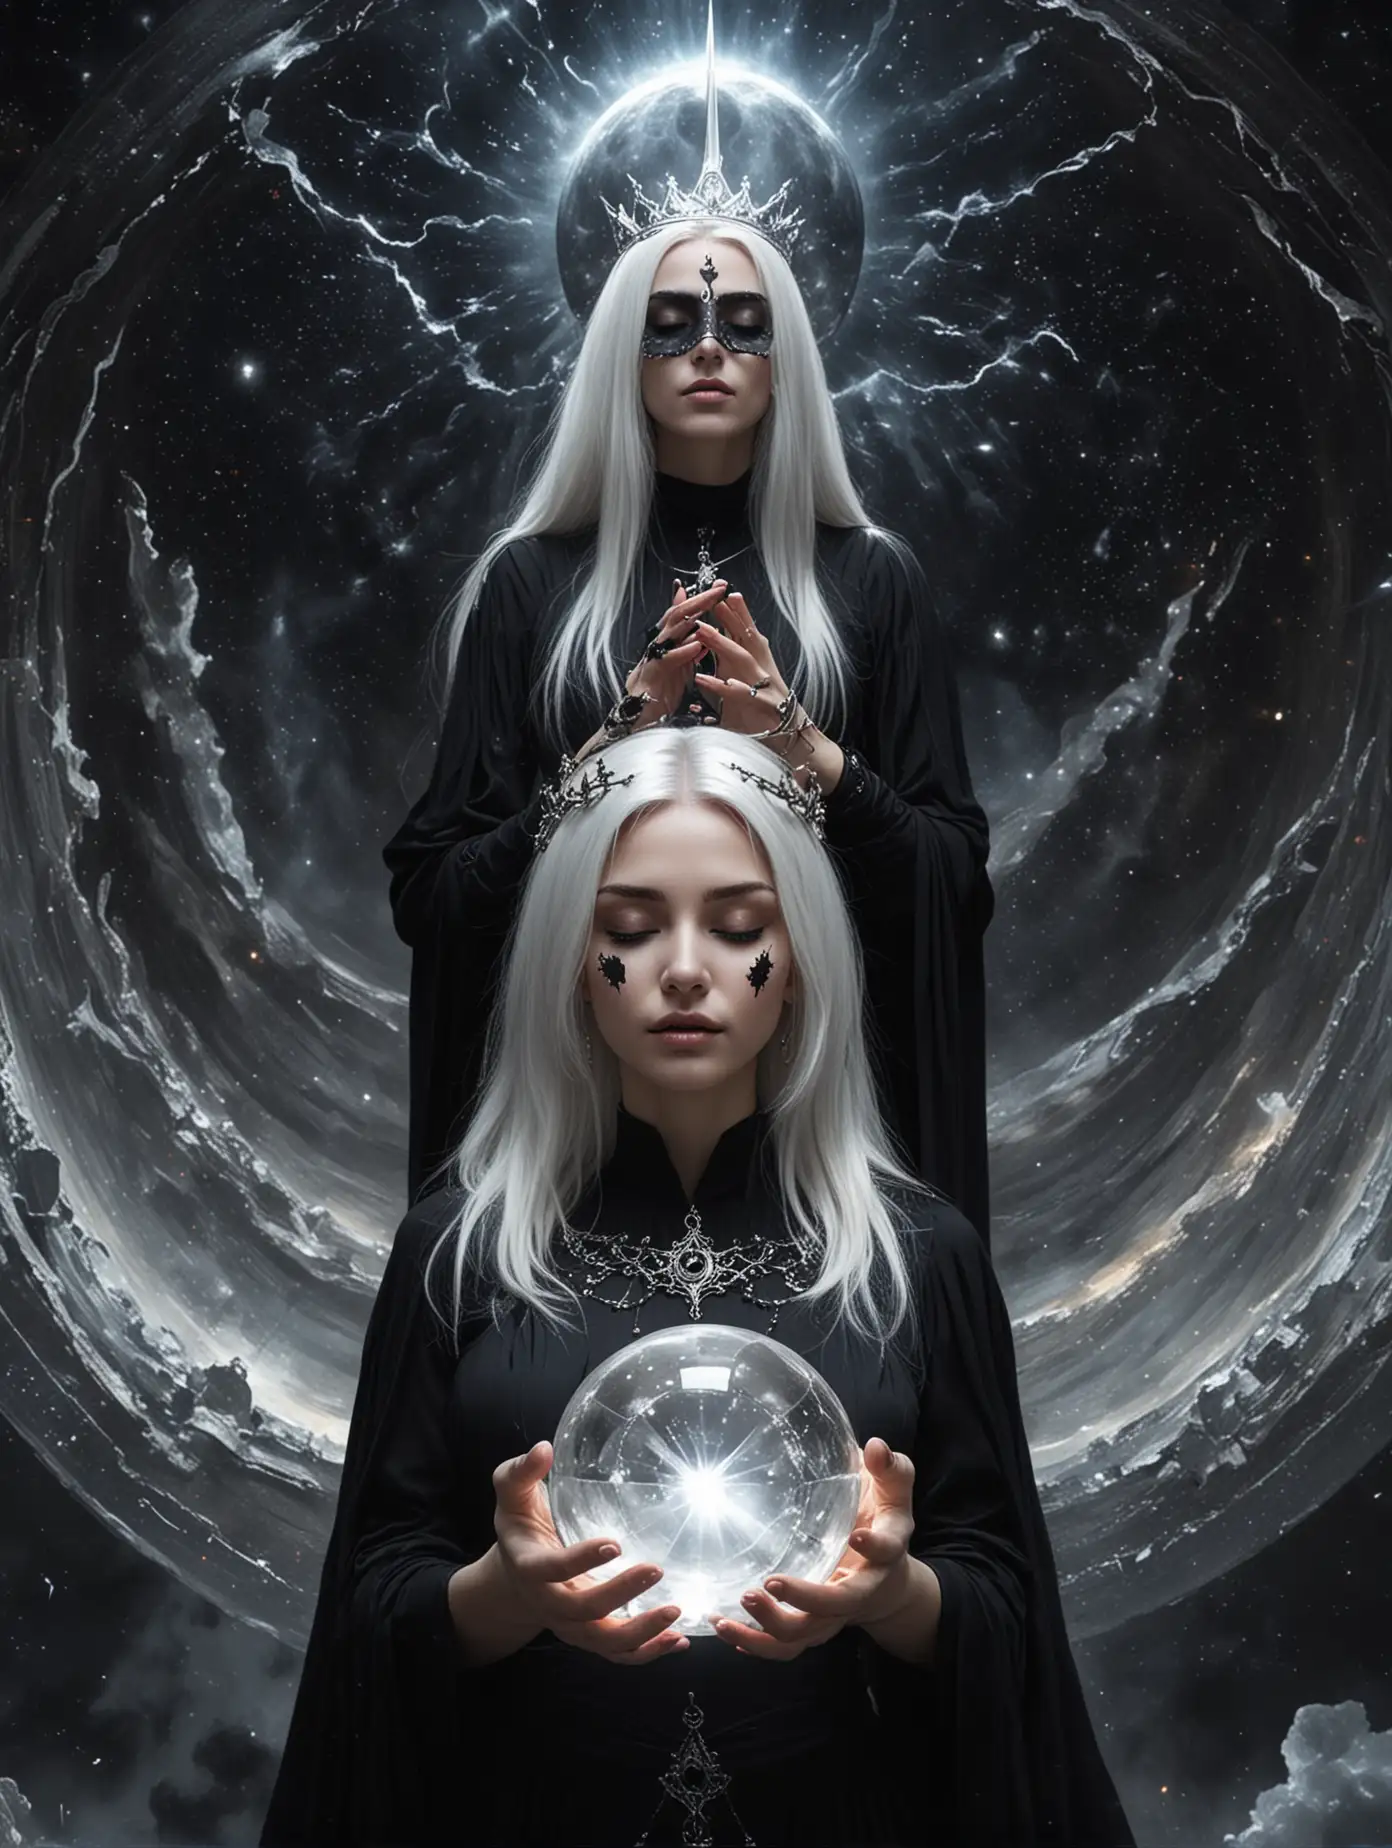 Mystical-Oracle-with-Silver-Crown-and-Crystal-Ball-Gazing-into-the-Abyss